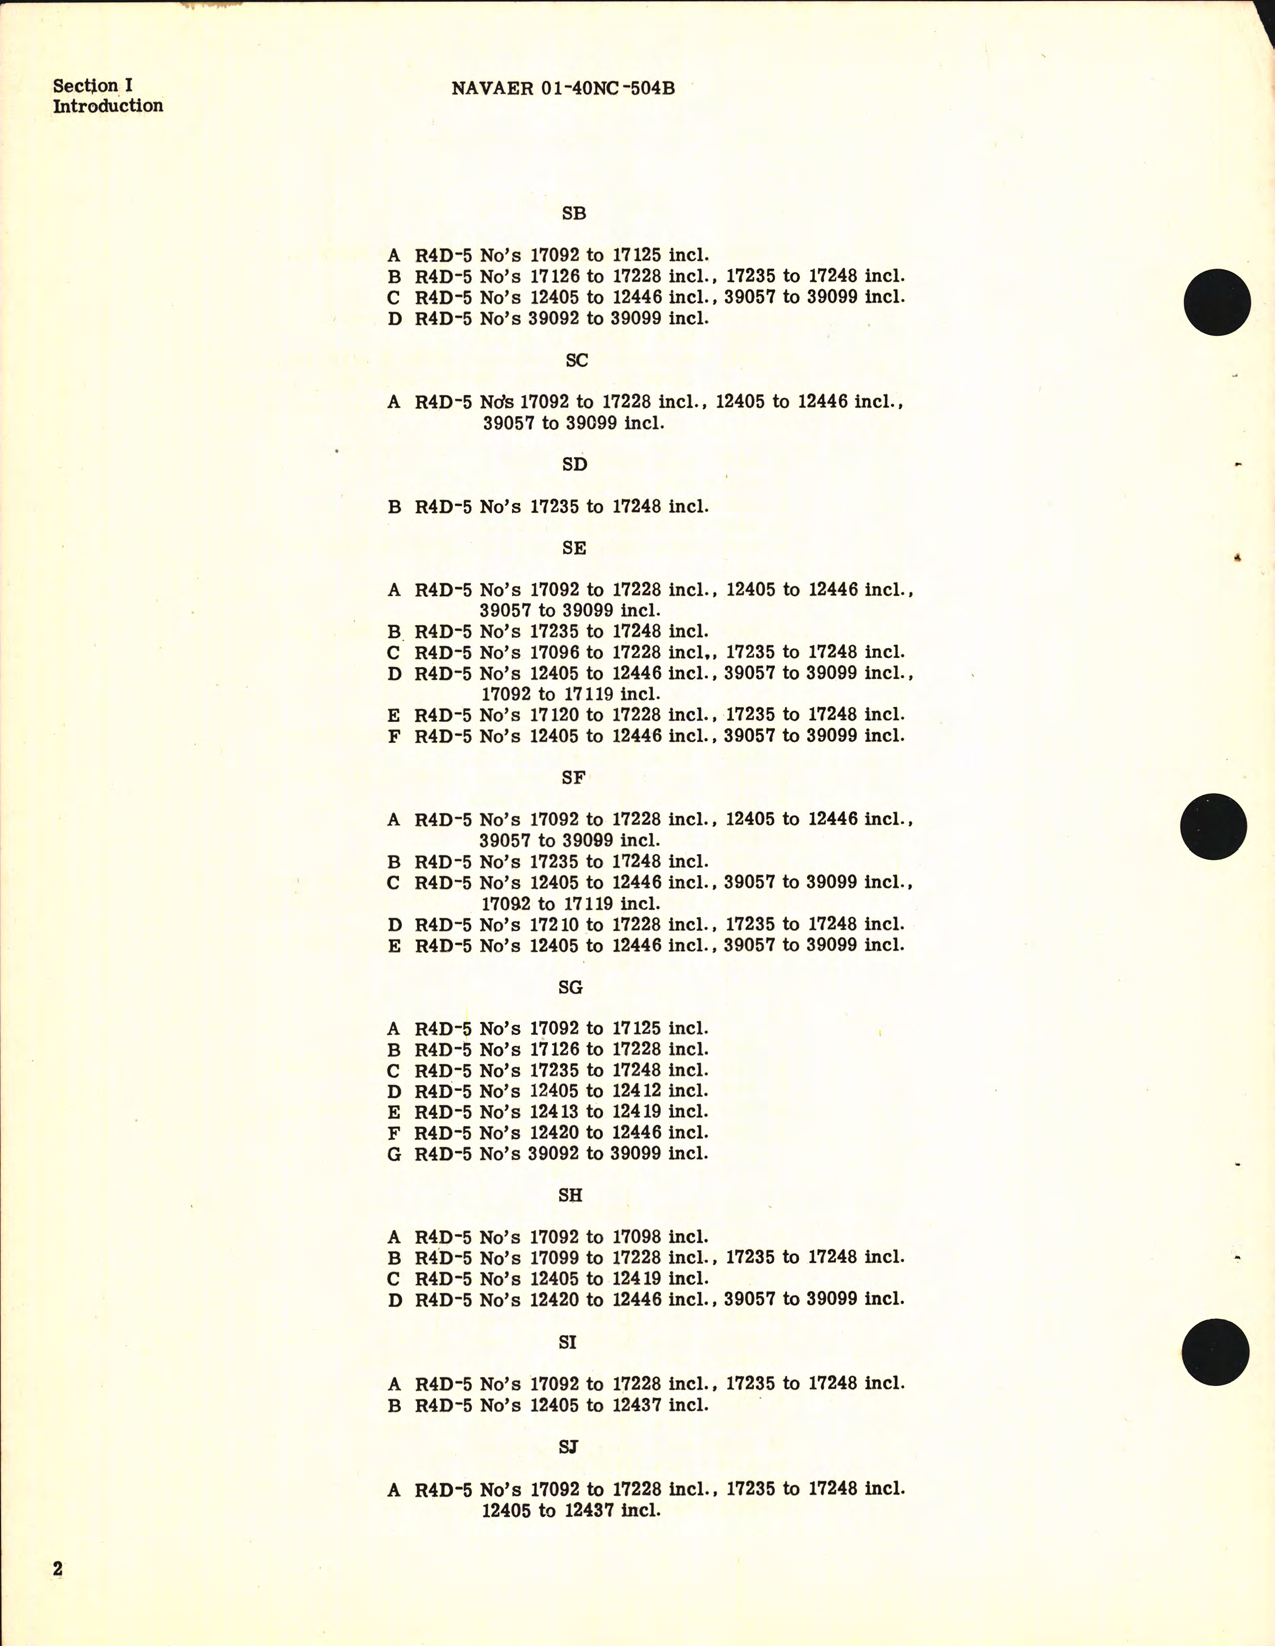 Sample page 8 from AirCorps Library document: Supplemental Parts Catalog for Navy Models R4D-5 Airplanes Modified by Curtiss-Wright